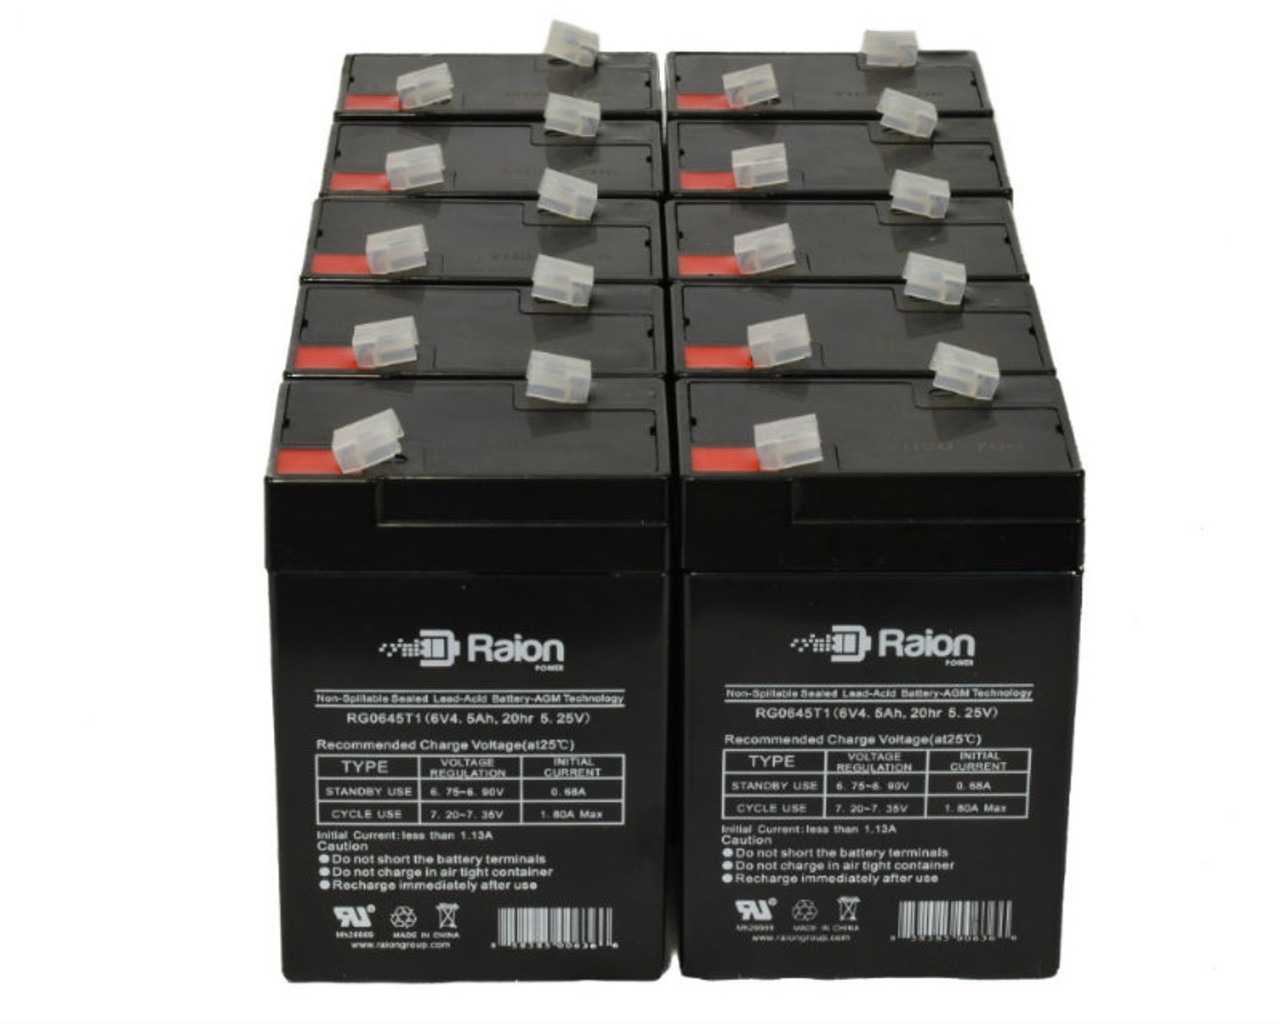 Raion Power RG0645T1 6V 4.5Ah Replacement Medical Equipment Battery for Castle Co 4900 Shampaine Surgical Table - 10 Pack